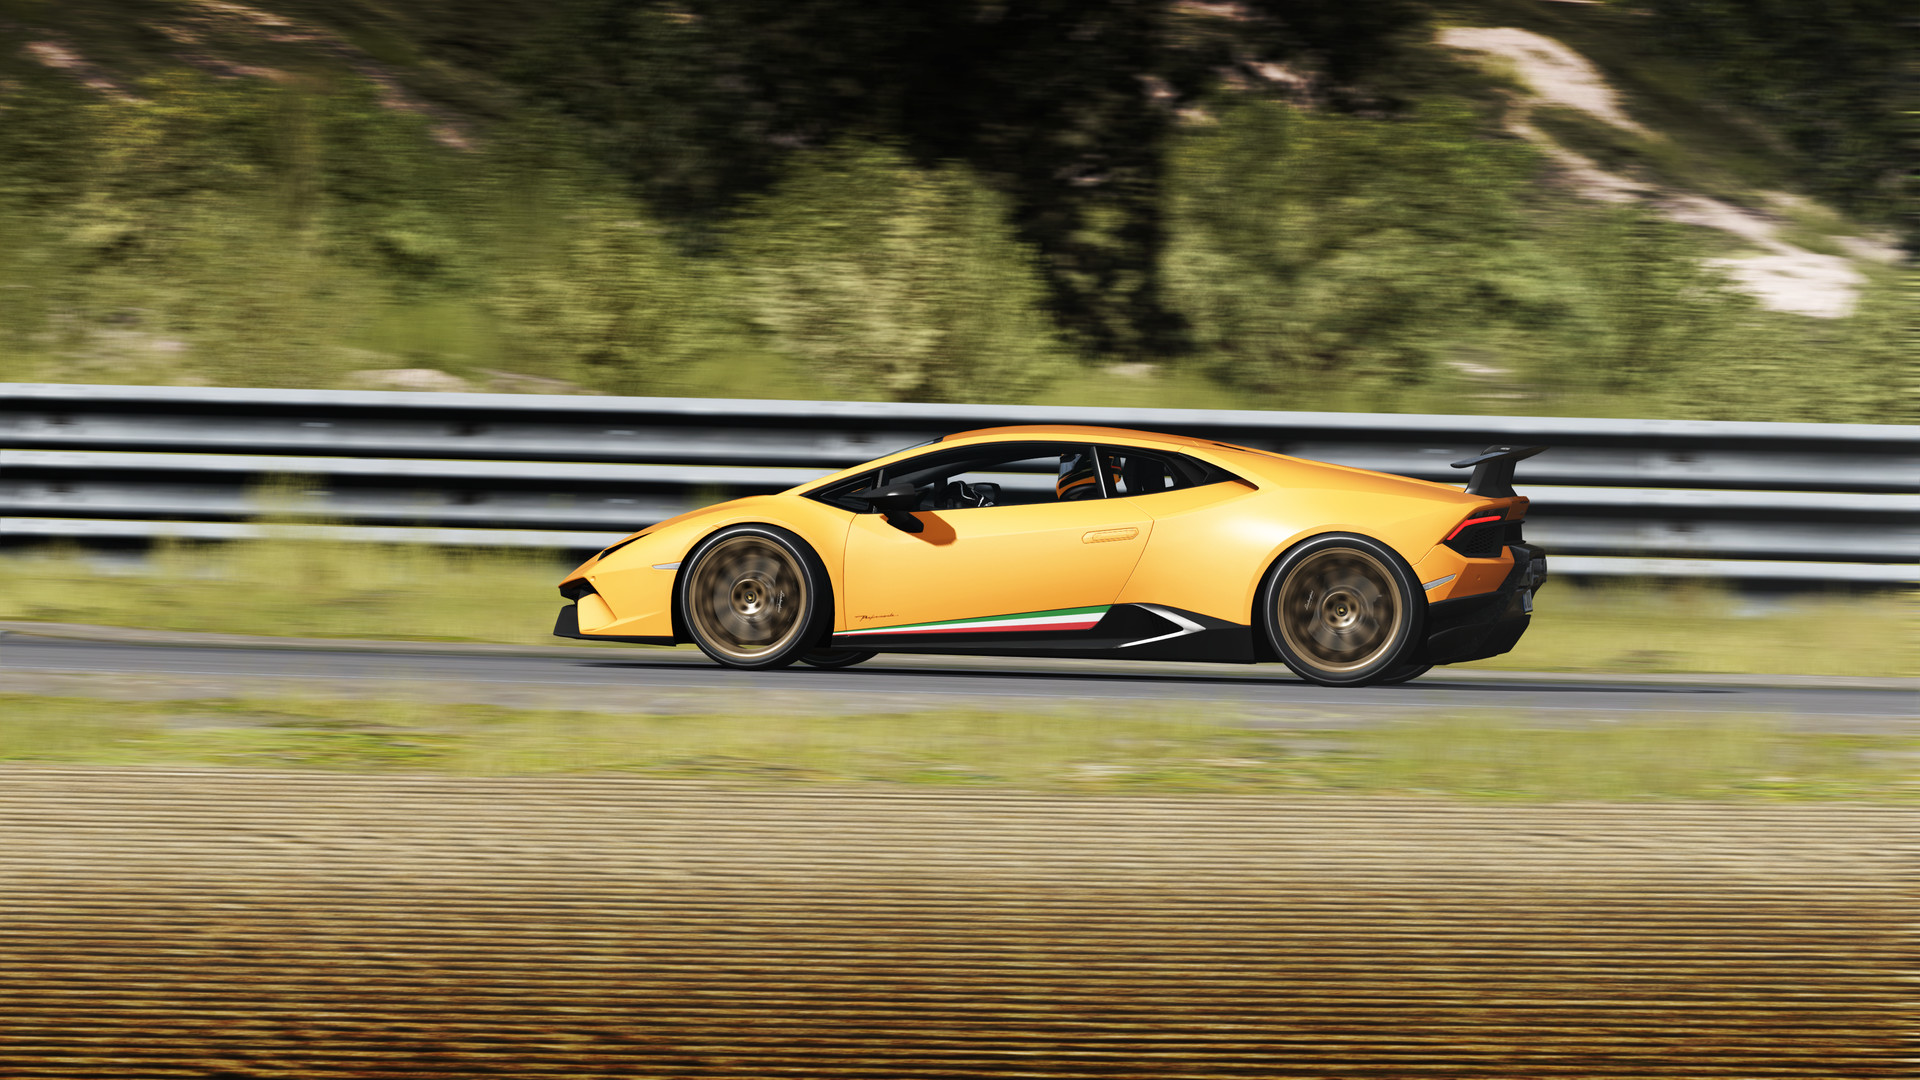 Assetto Corsa system requirements